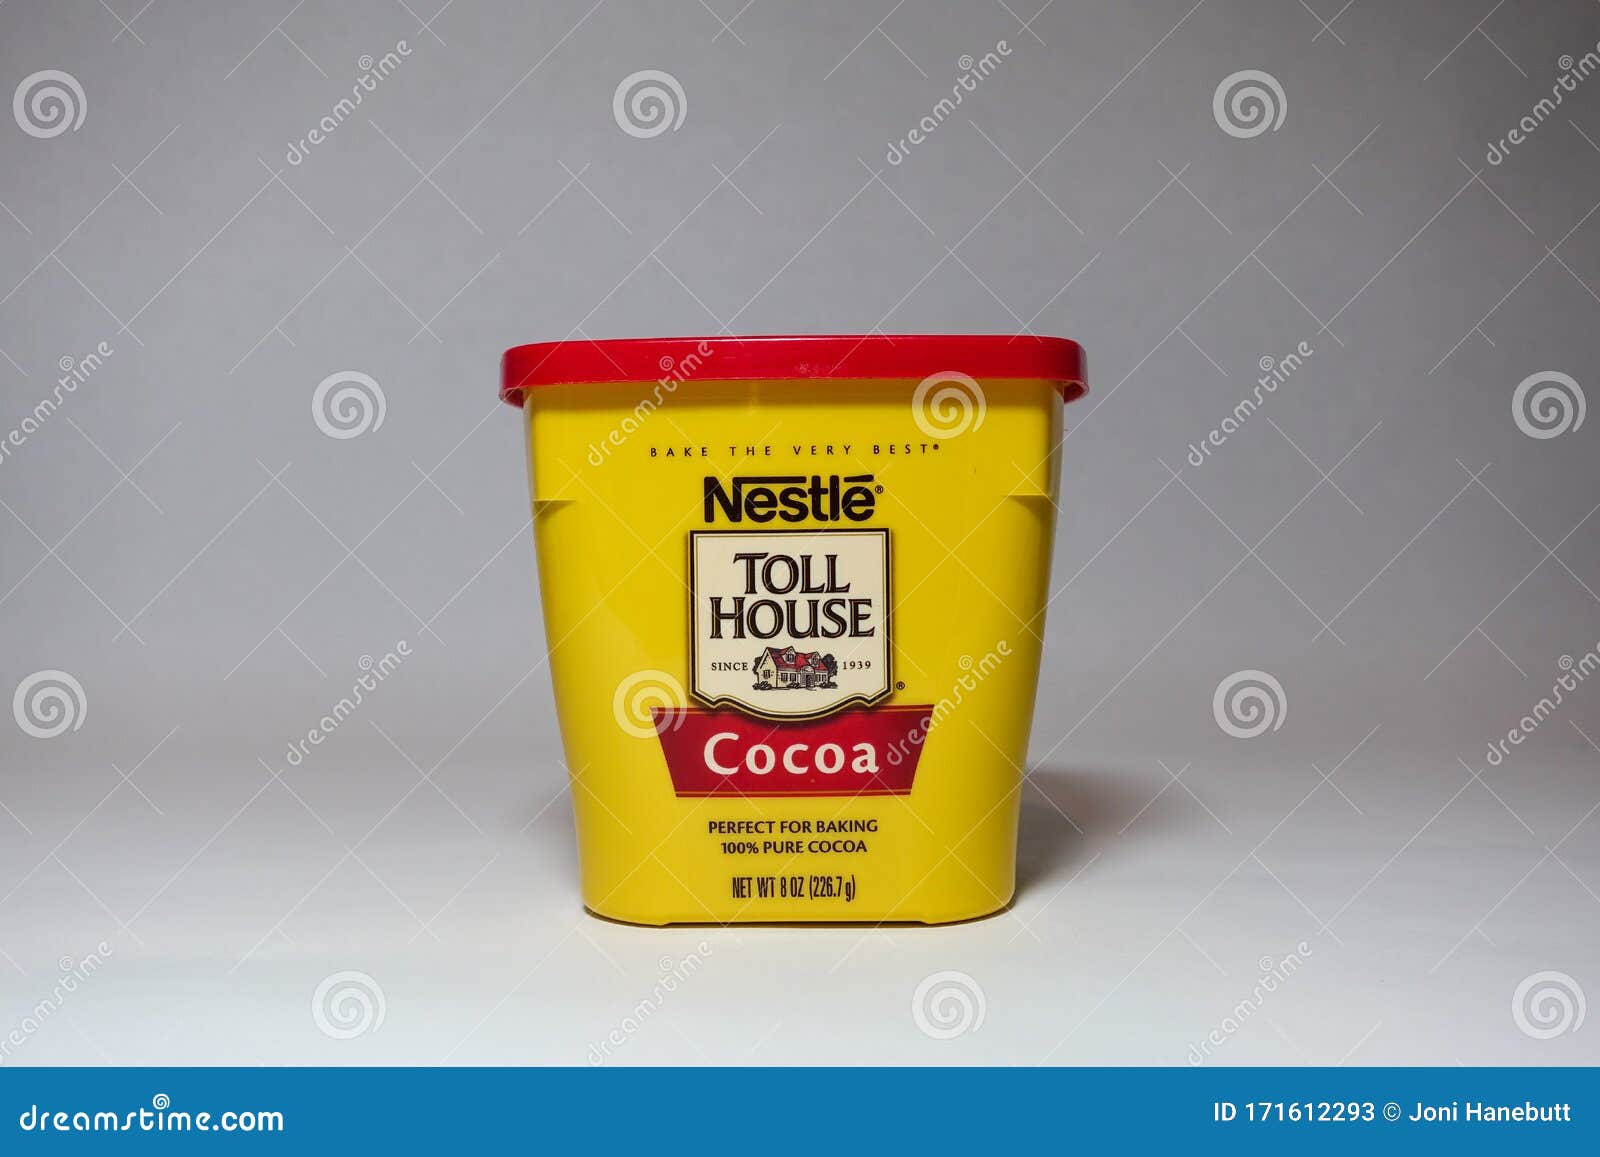 Download A Jar Of Nestle Toll House Cocoa Powder Isolated On A White Background Editorial Stock Photo Image Of Candy Cake 171612293 Yellowimages Mockups